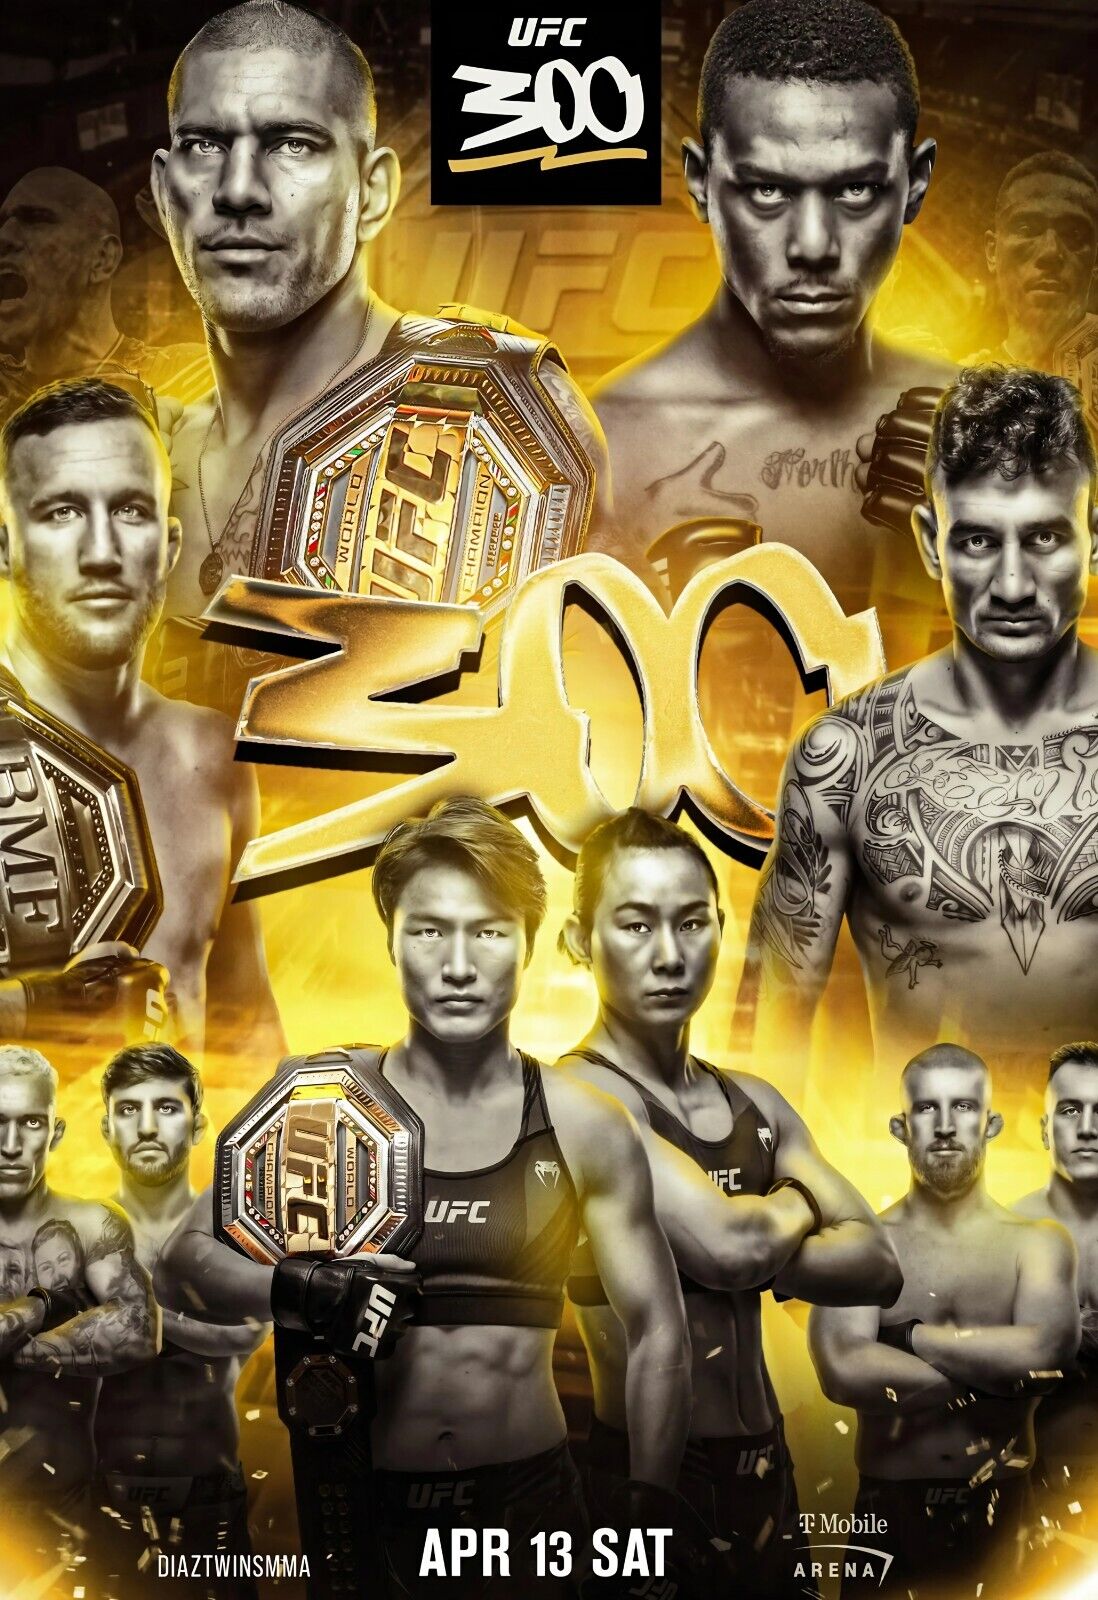 UFC 300 Fight Poster 11x17 Inches - Pereira vs Hill | Gaethje vs Holloway - NEW